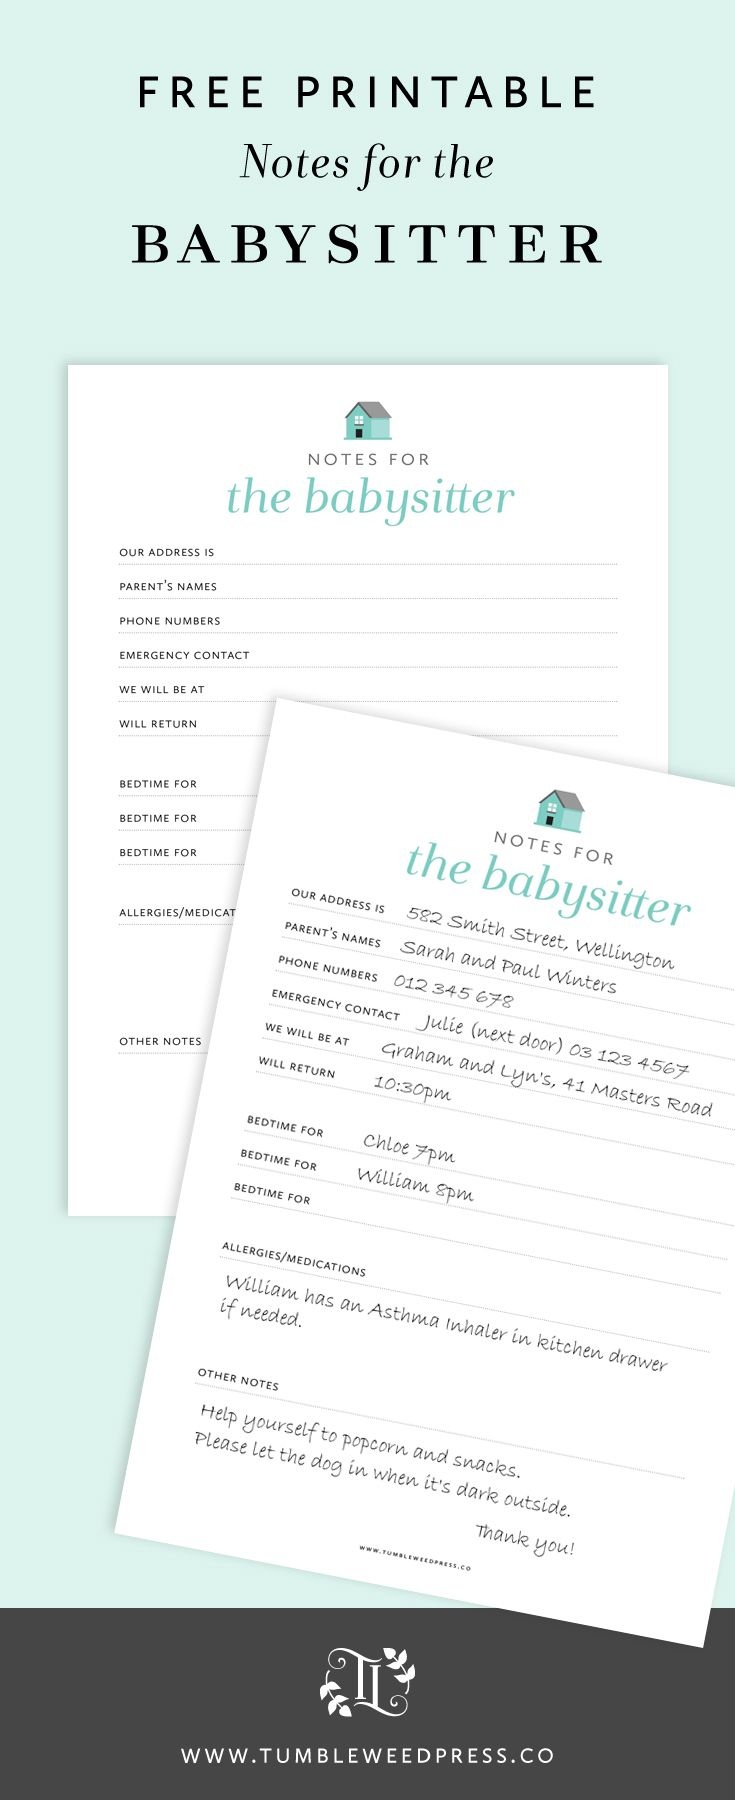 Babysitter Notes Free Printable | Print It Out | Babysitter Notes - Babysitter Notes Free Printable